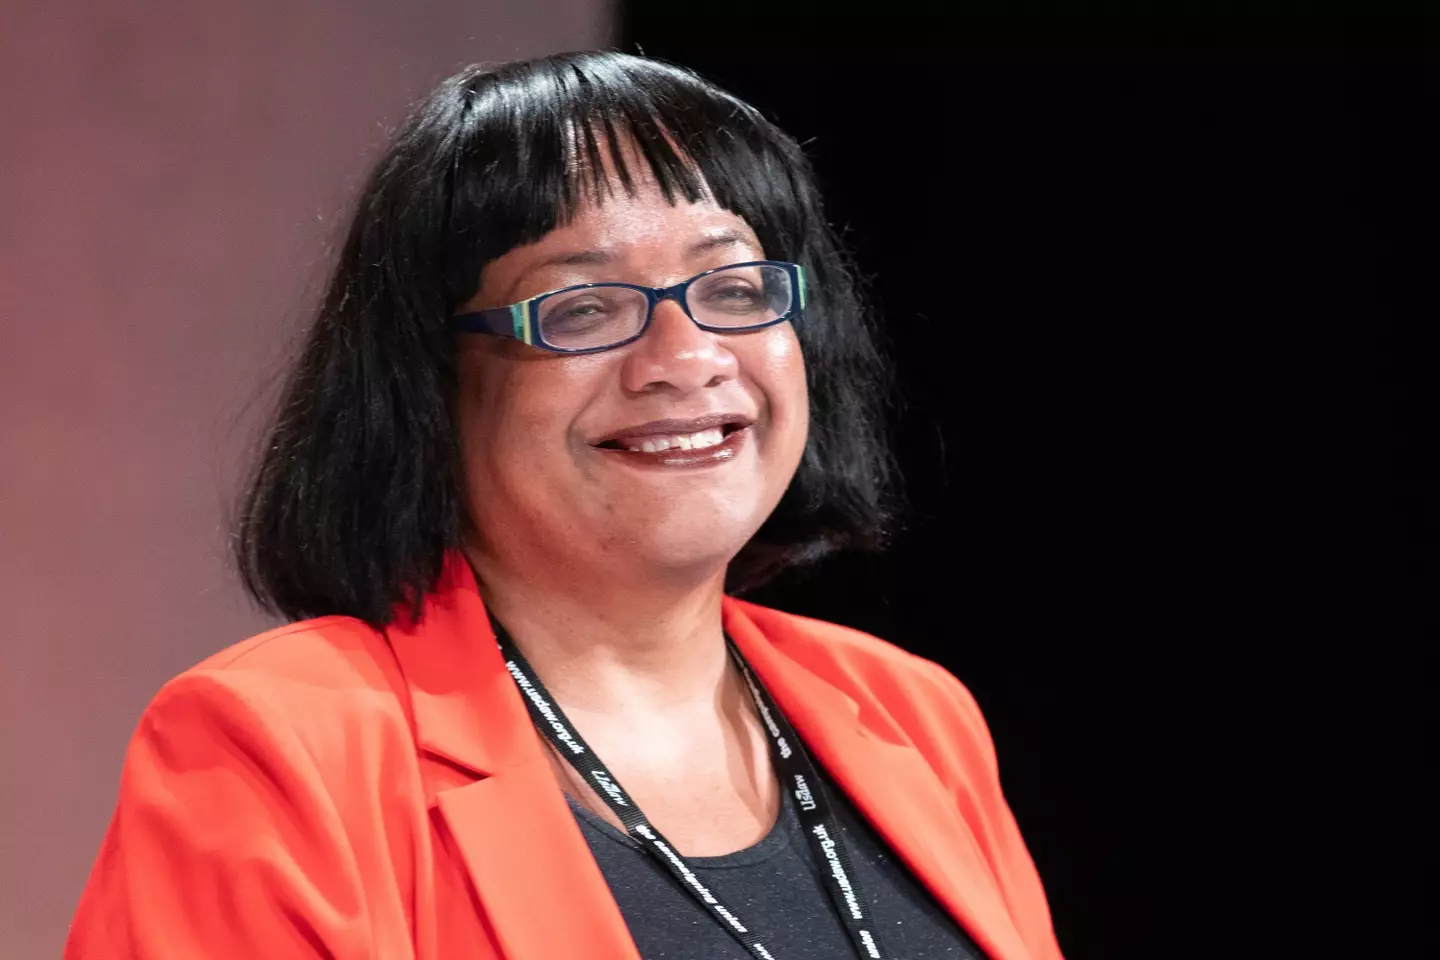 Diane Abbott has been suspended by the Labour Party.